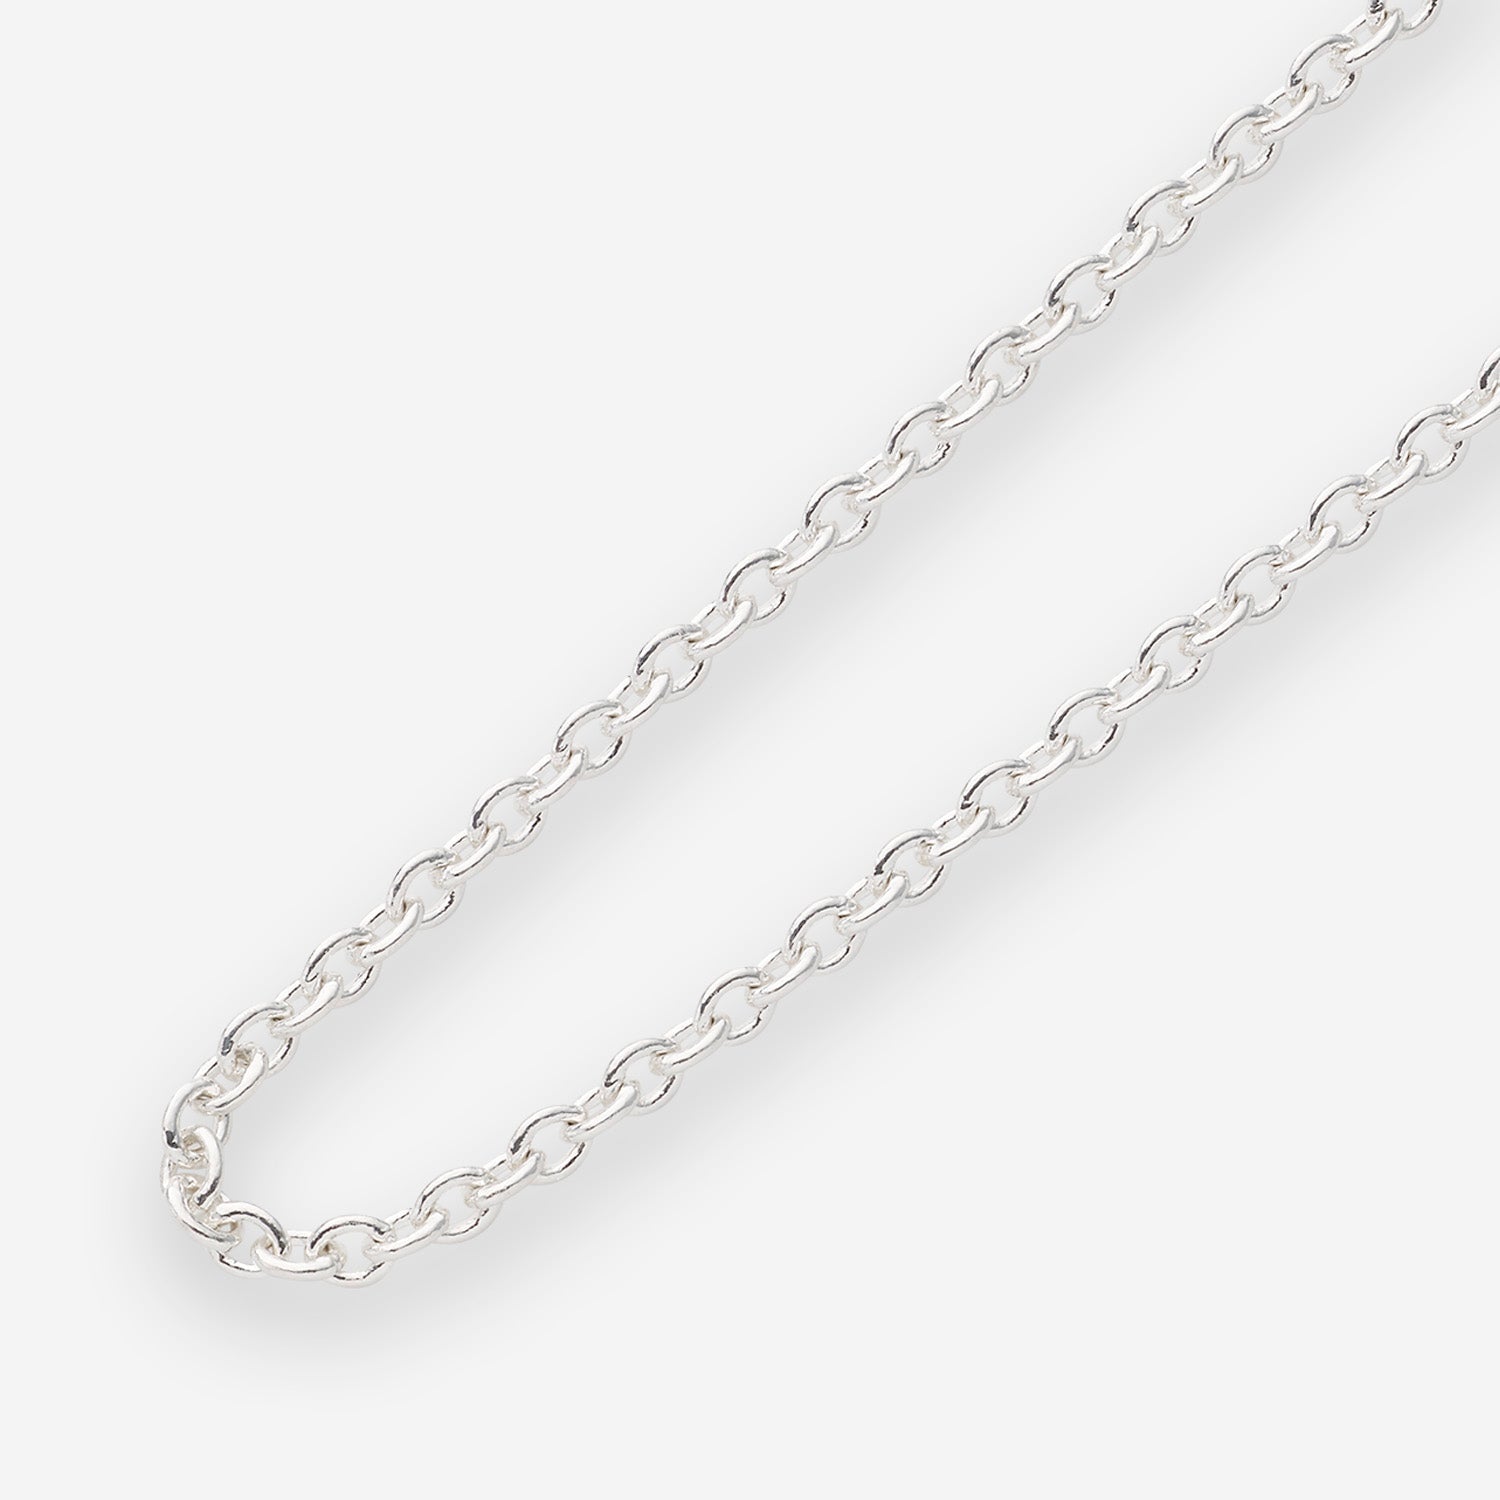 886 Royal Mint Necklaces 886 Trace Chain in Sterling Silver